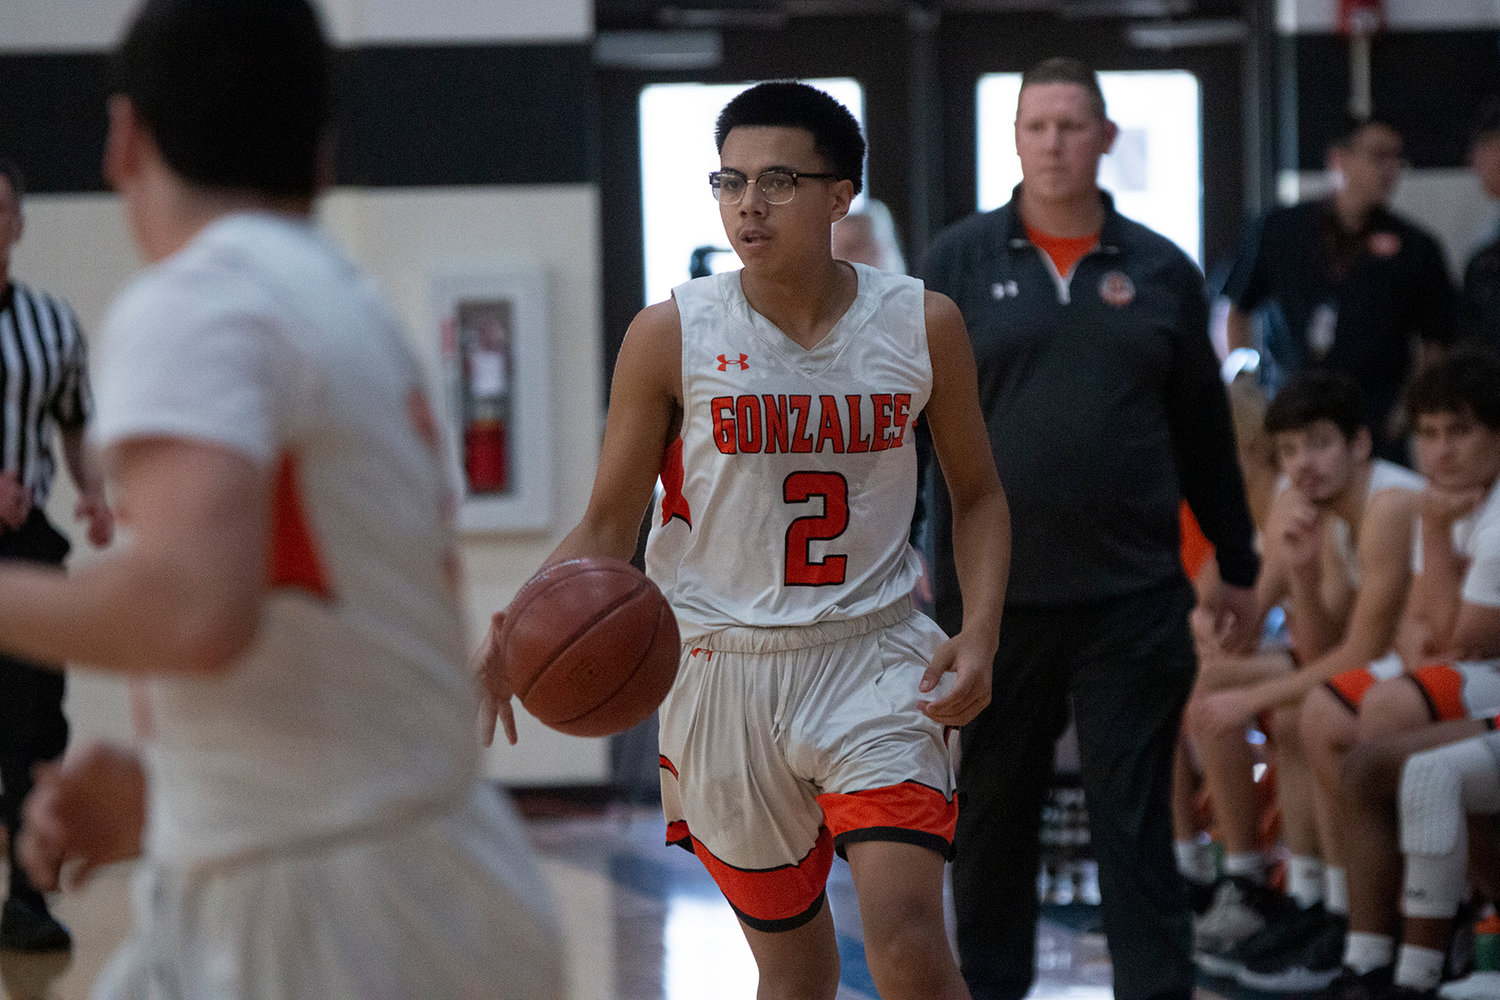 Xavier Aguayo (2) dribbles down the court in their 61-57 victory over Yorktown last Friday. The Gonzales Apaches won all four of their games to take first place in their home tournament.